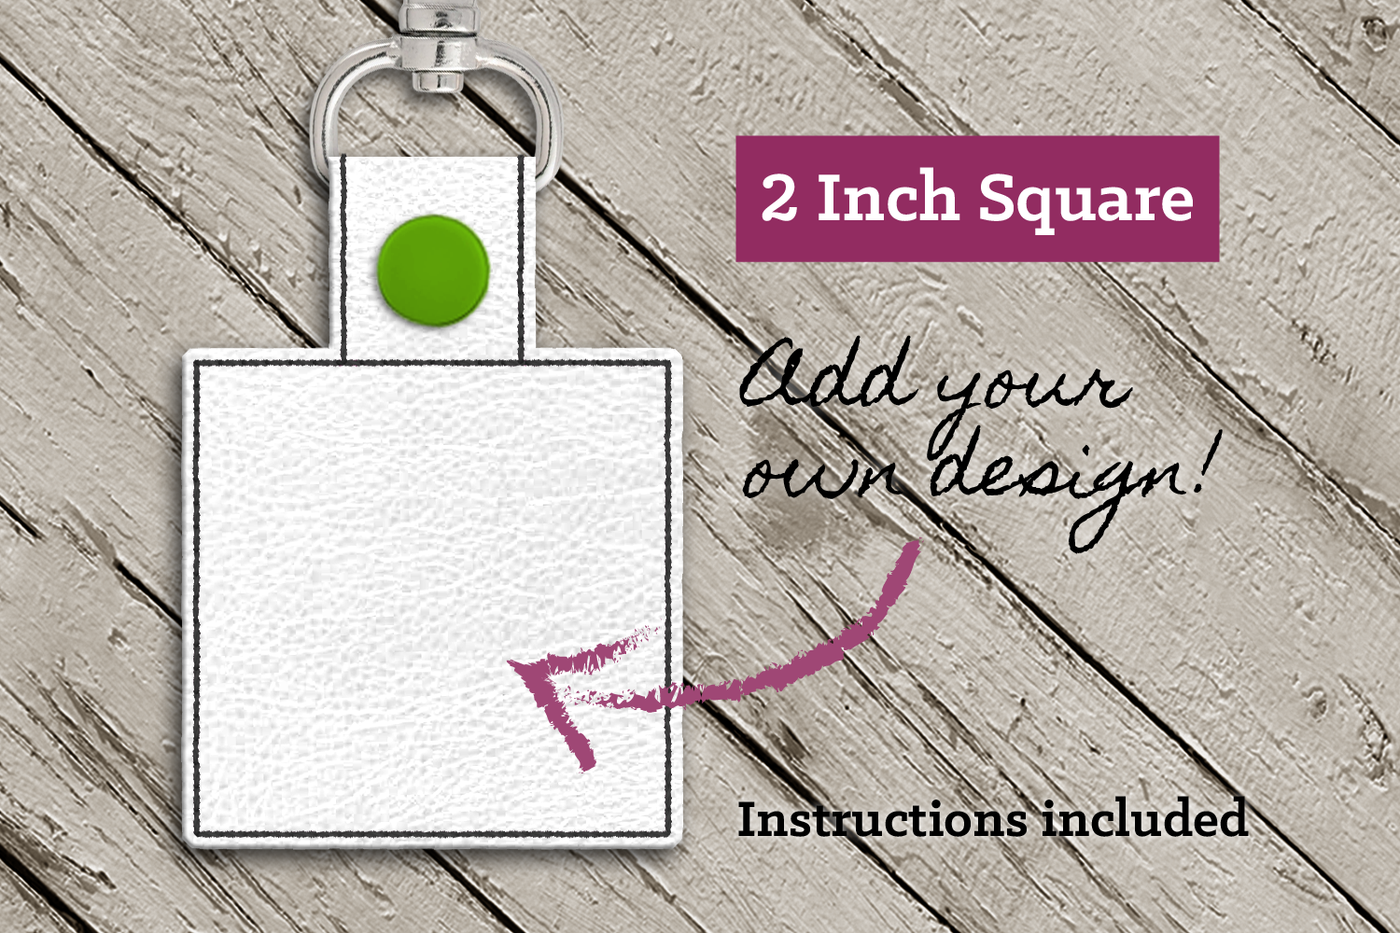 Blank 2 inch square ITH key fob, Instructions included. Add your own design to the square.